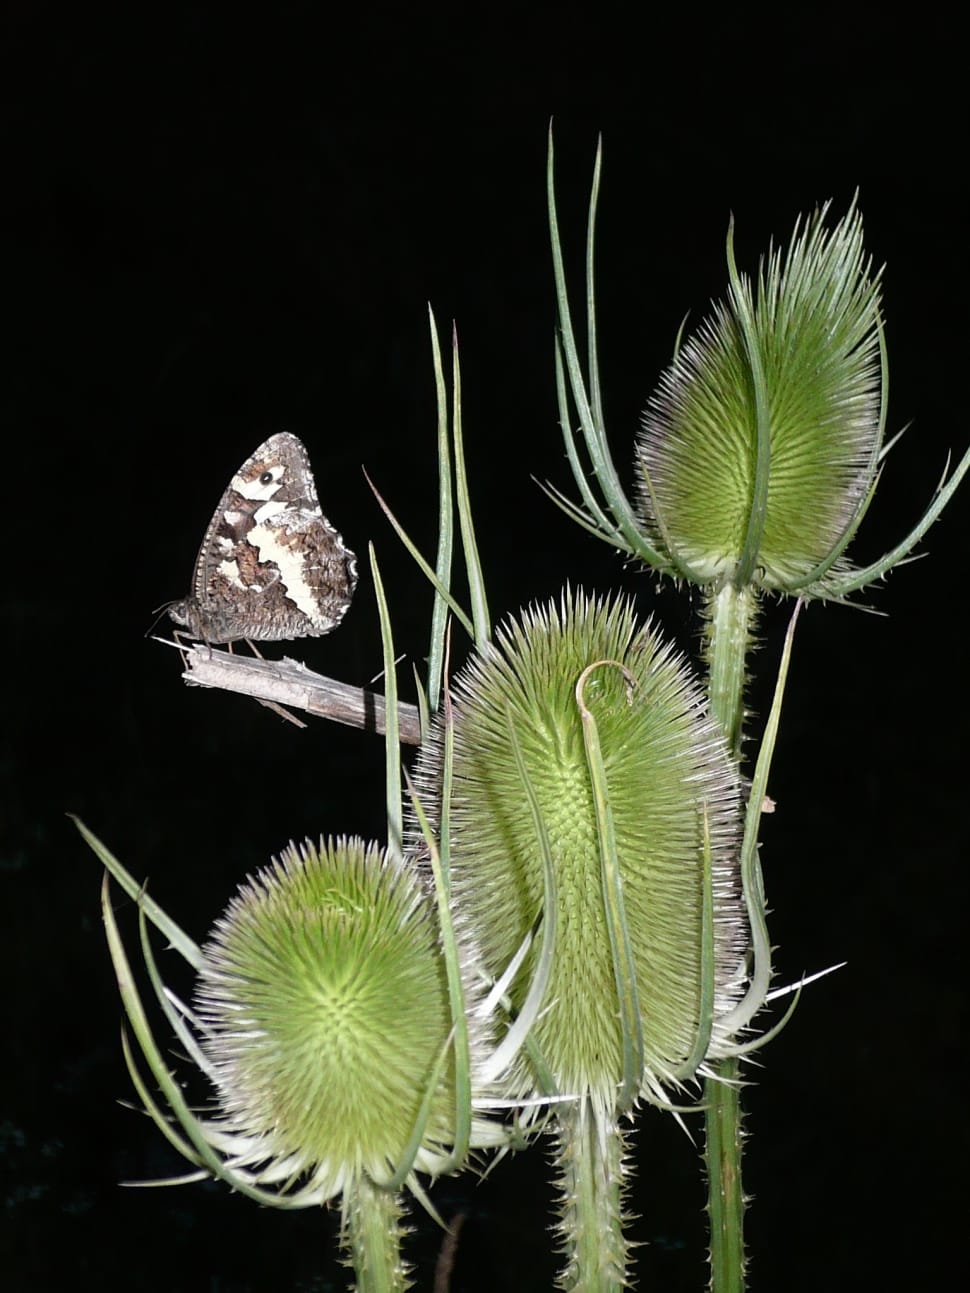 Moorish King, Teasel, Butterfly, Thistle, plant, nature preview